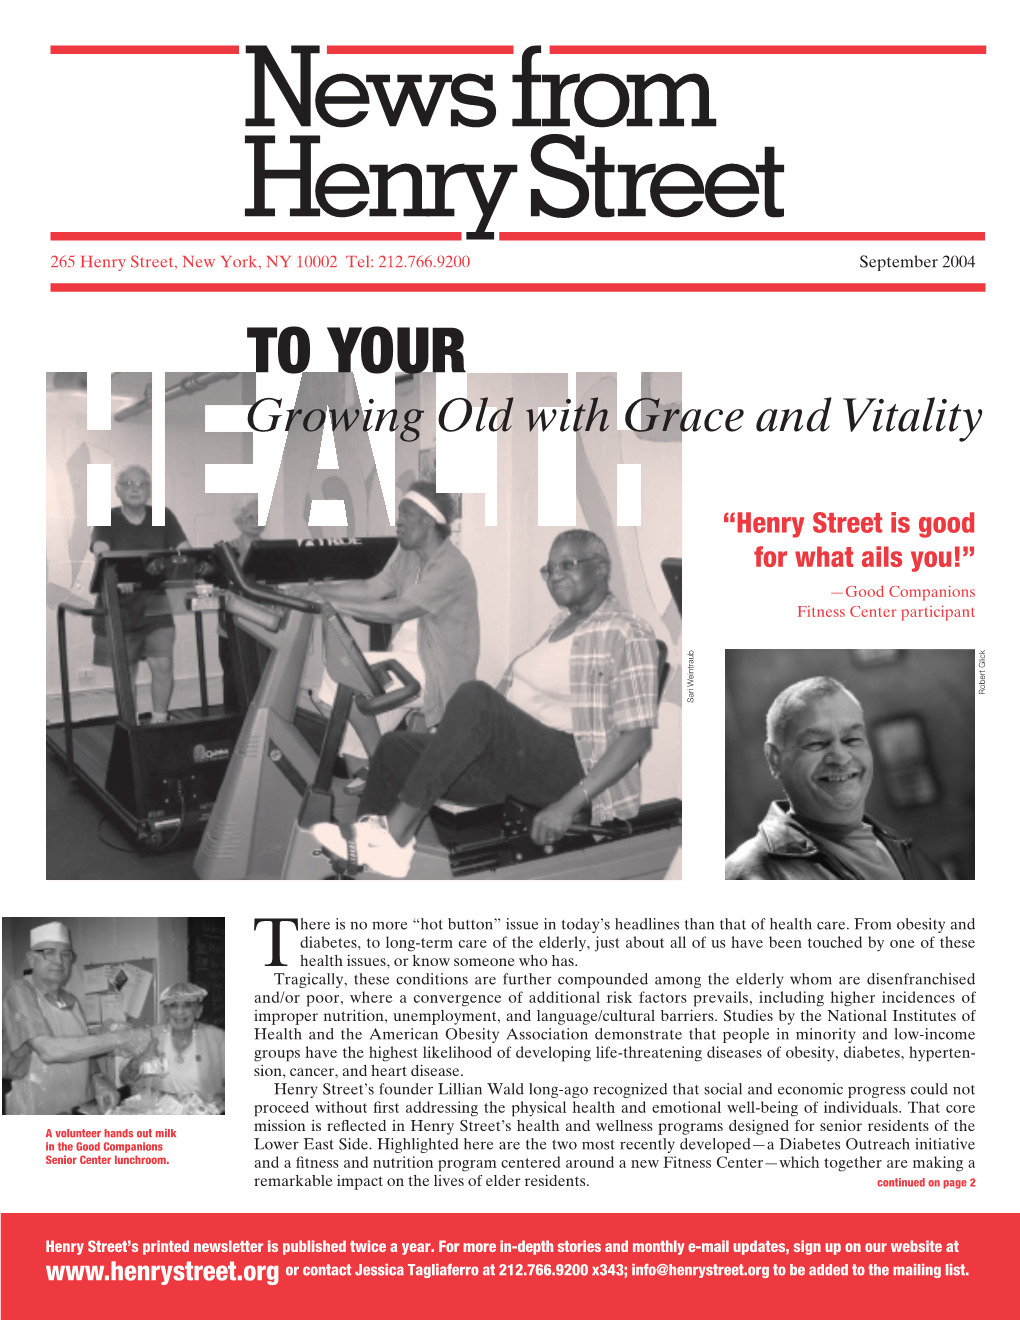 News from Henry Street (Fall 2004)